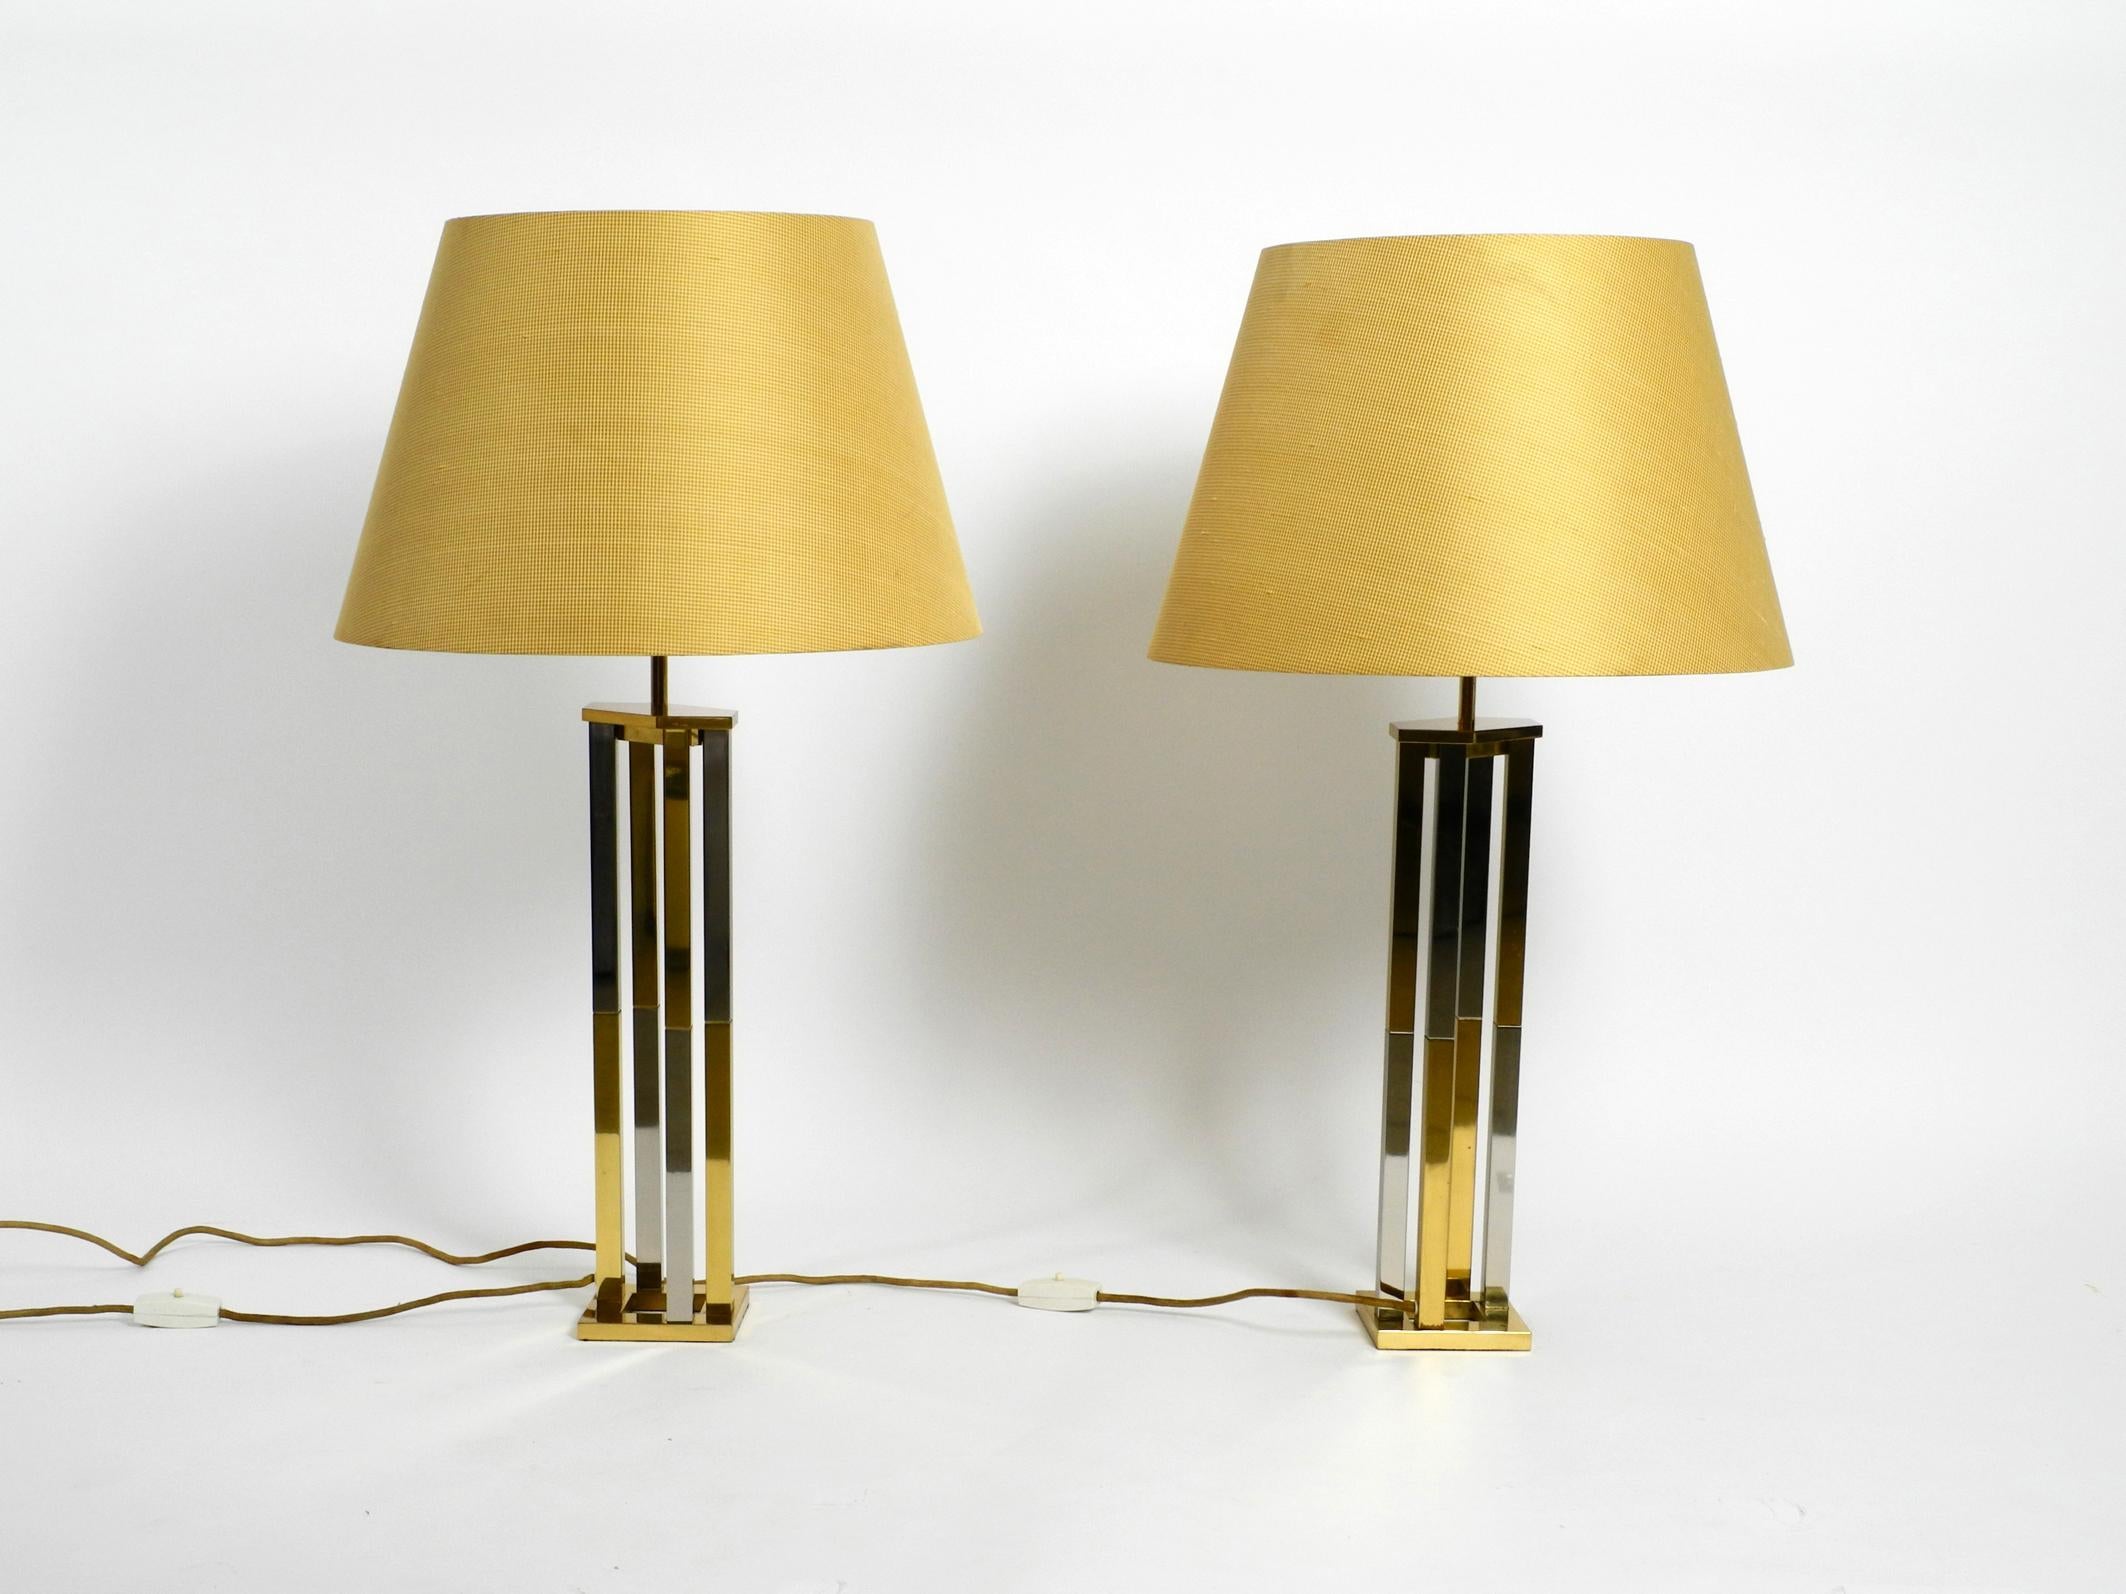 A pair of very rare large table lamps from Vereinigte Werkstätten.
With original label on both lamps. Made in Germany in the 1970s.
Great Minimalist design in original vintage condition.
Completely made of solid heavy brass. Frame in gold and